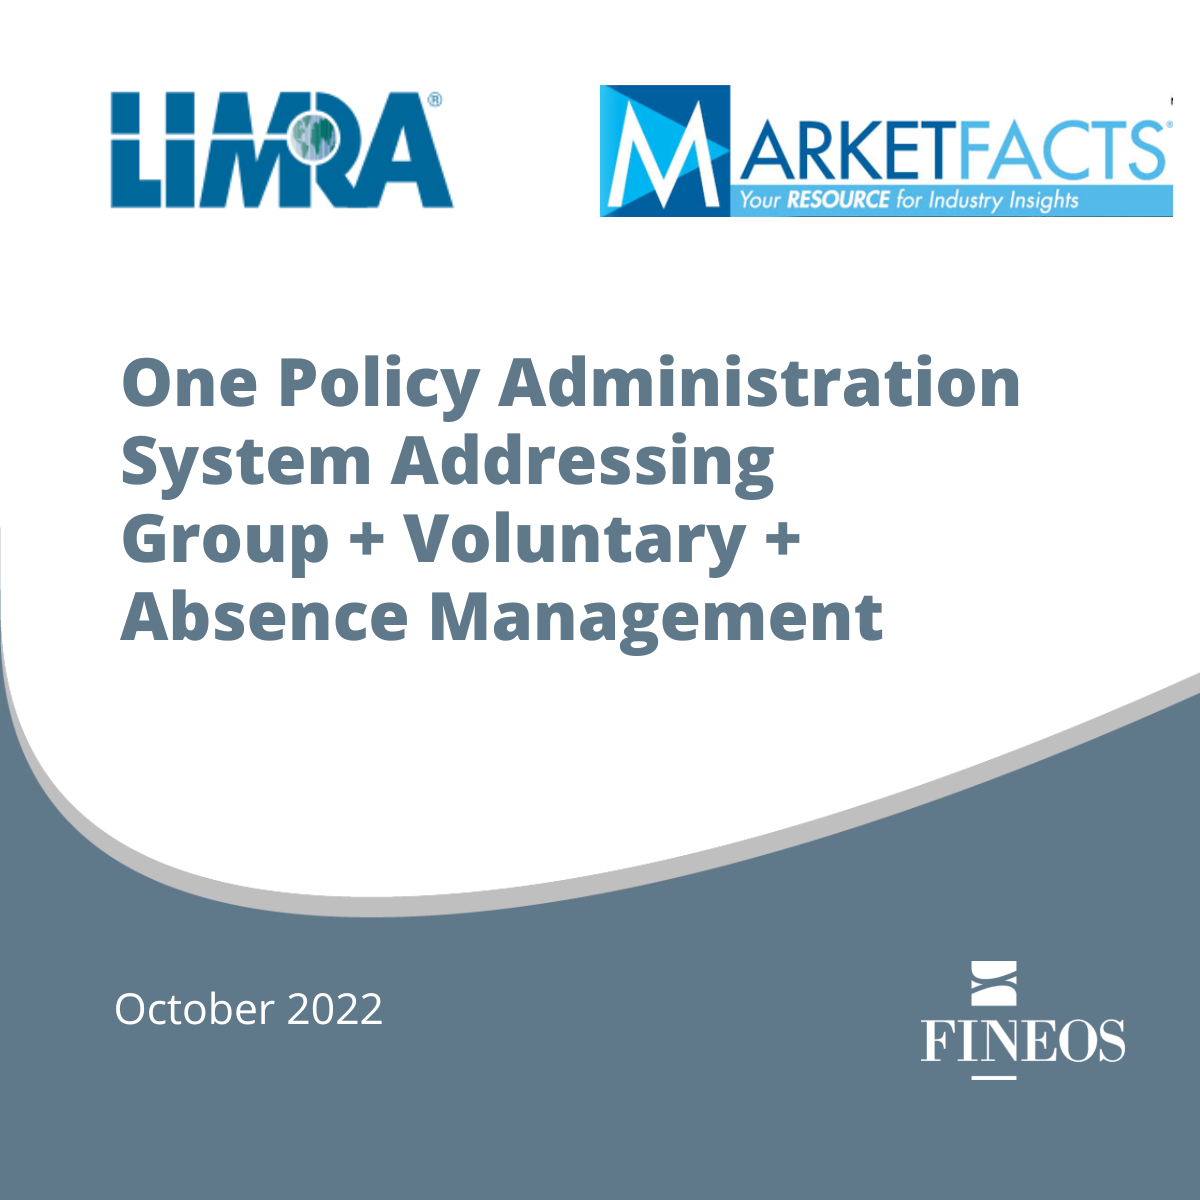 One Policy Administration System Addressing Group + Voluntary + Absence Management